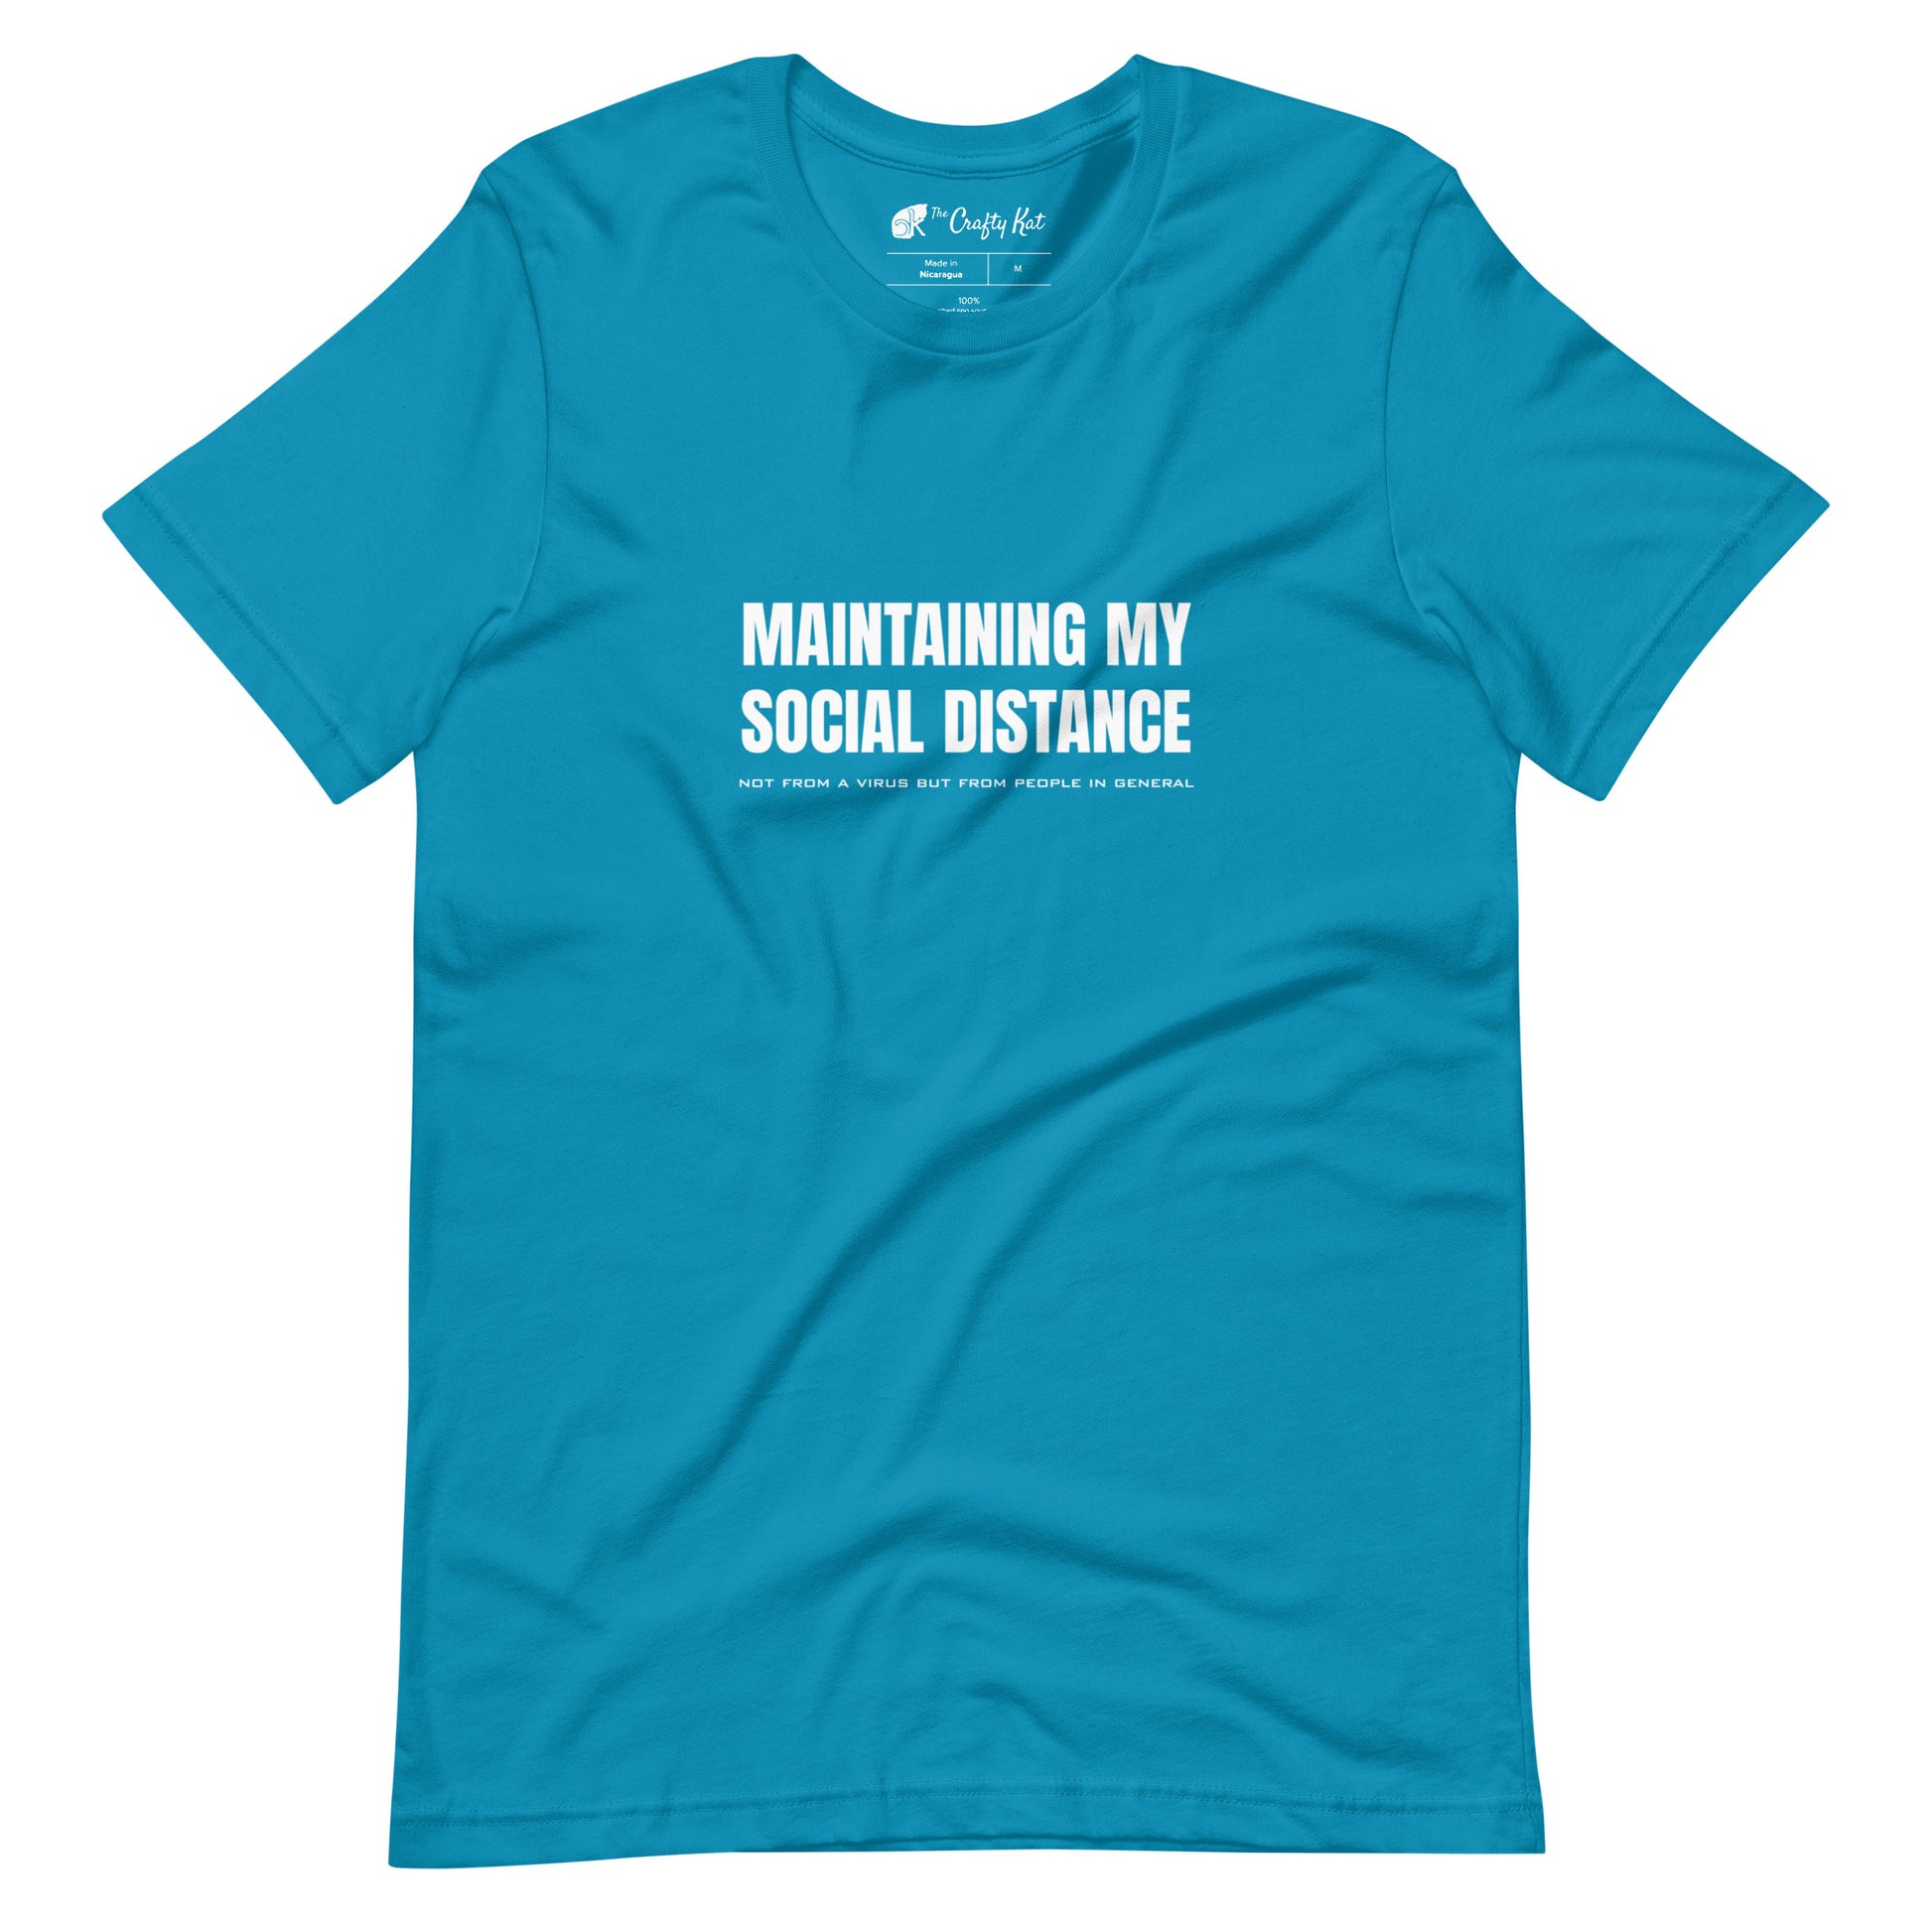 Aqua (cyan) t-shirt with white graphic: "MAINTAINING MY SOCIAL DISTANCE not from a virus but from people in general"